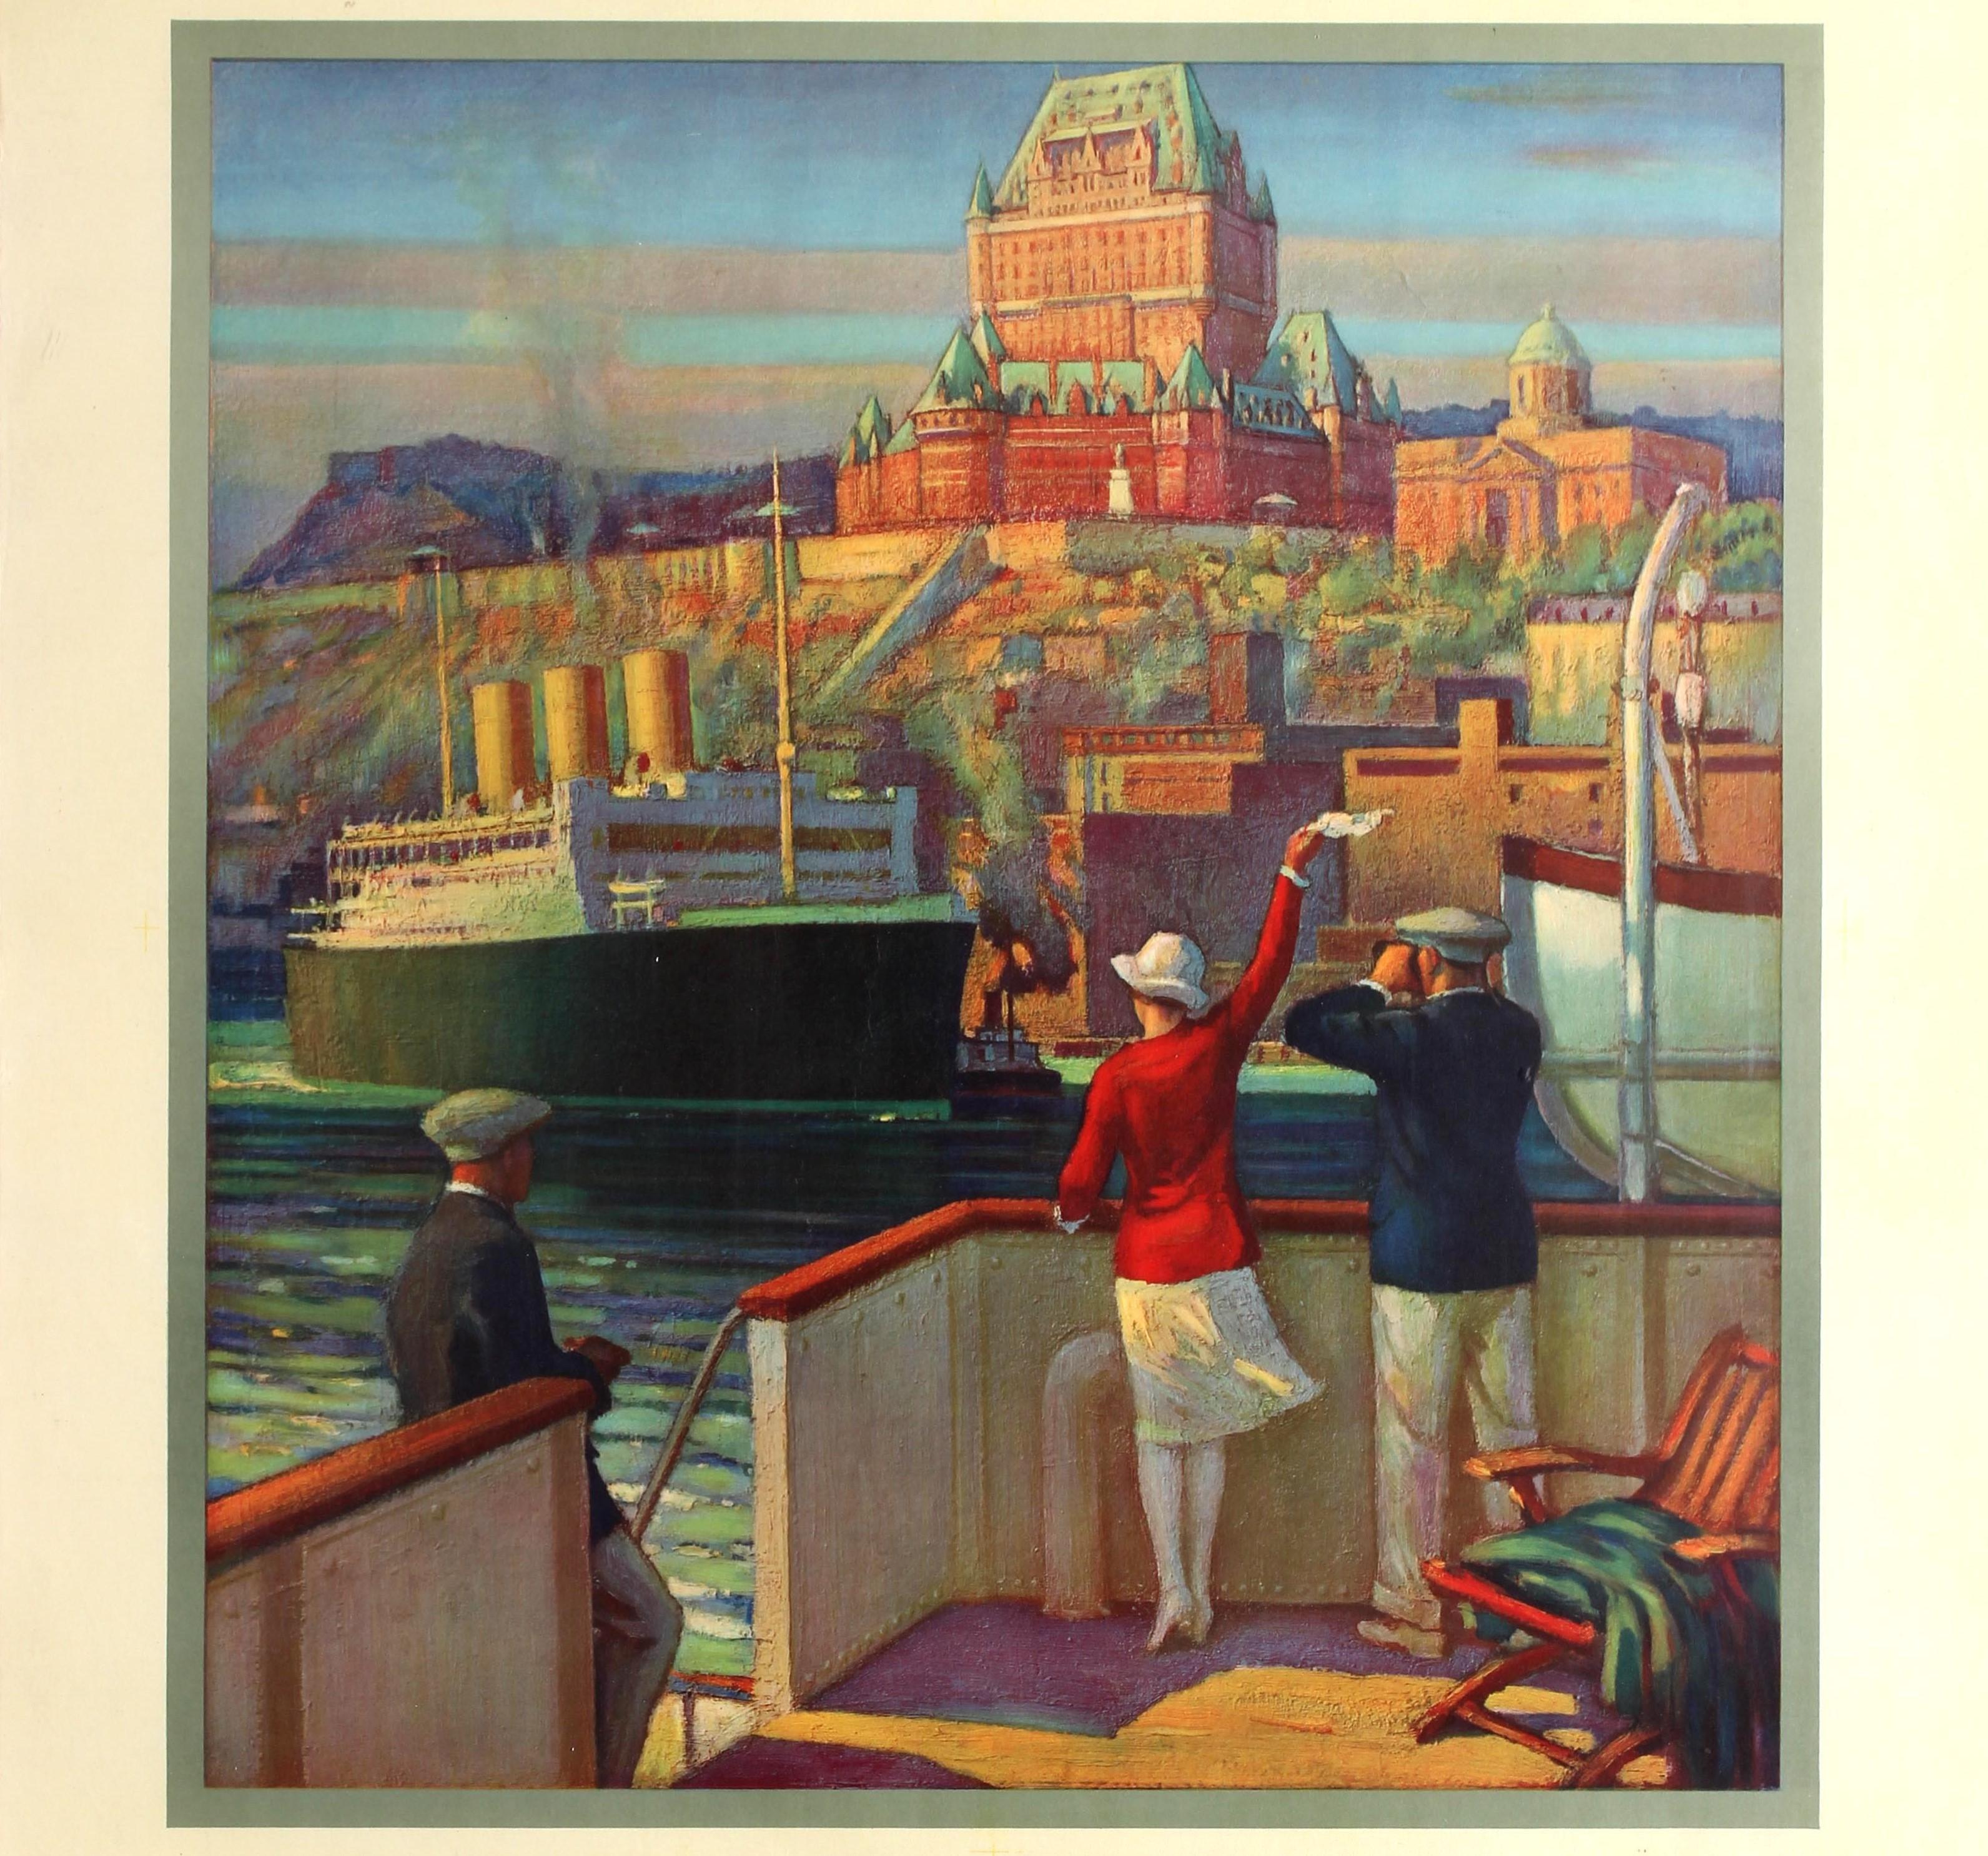 Original vintage Art Deco travel advertising poster: Empresses of the Atlantic - The Big Fast First Class Ships of The St. Lawrence Route to Europe - Canadian Pacific Steamships. Great artwork showing a stylish couple standing at the back of a ship